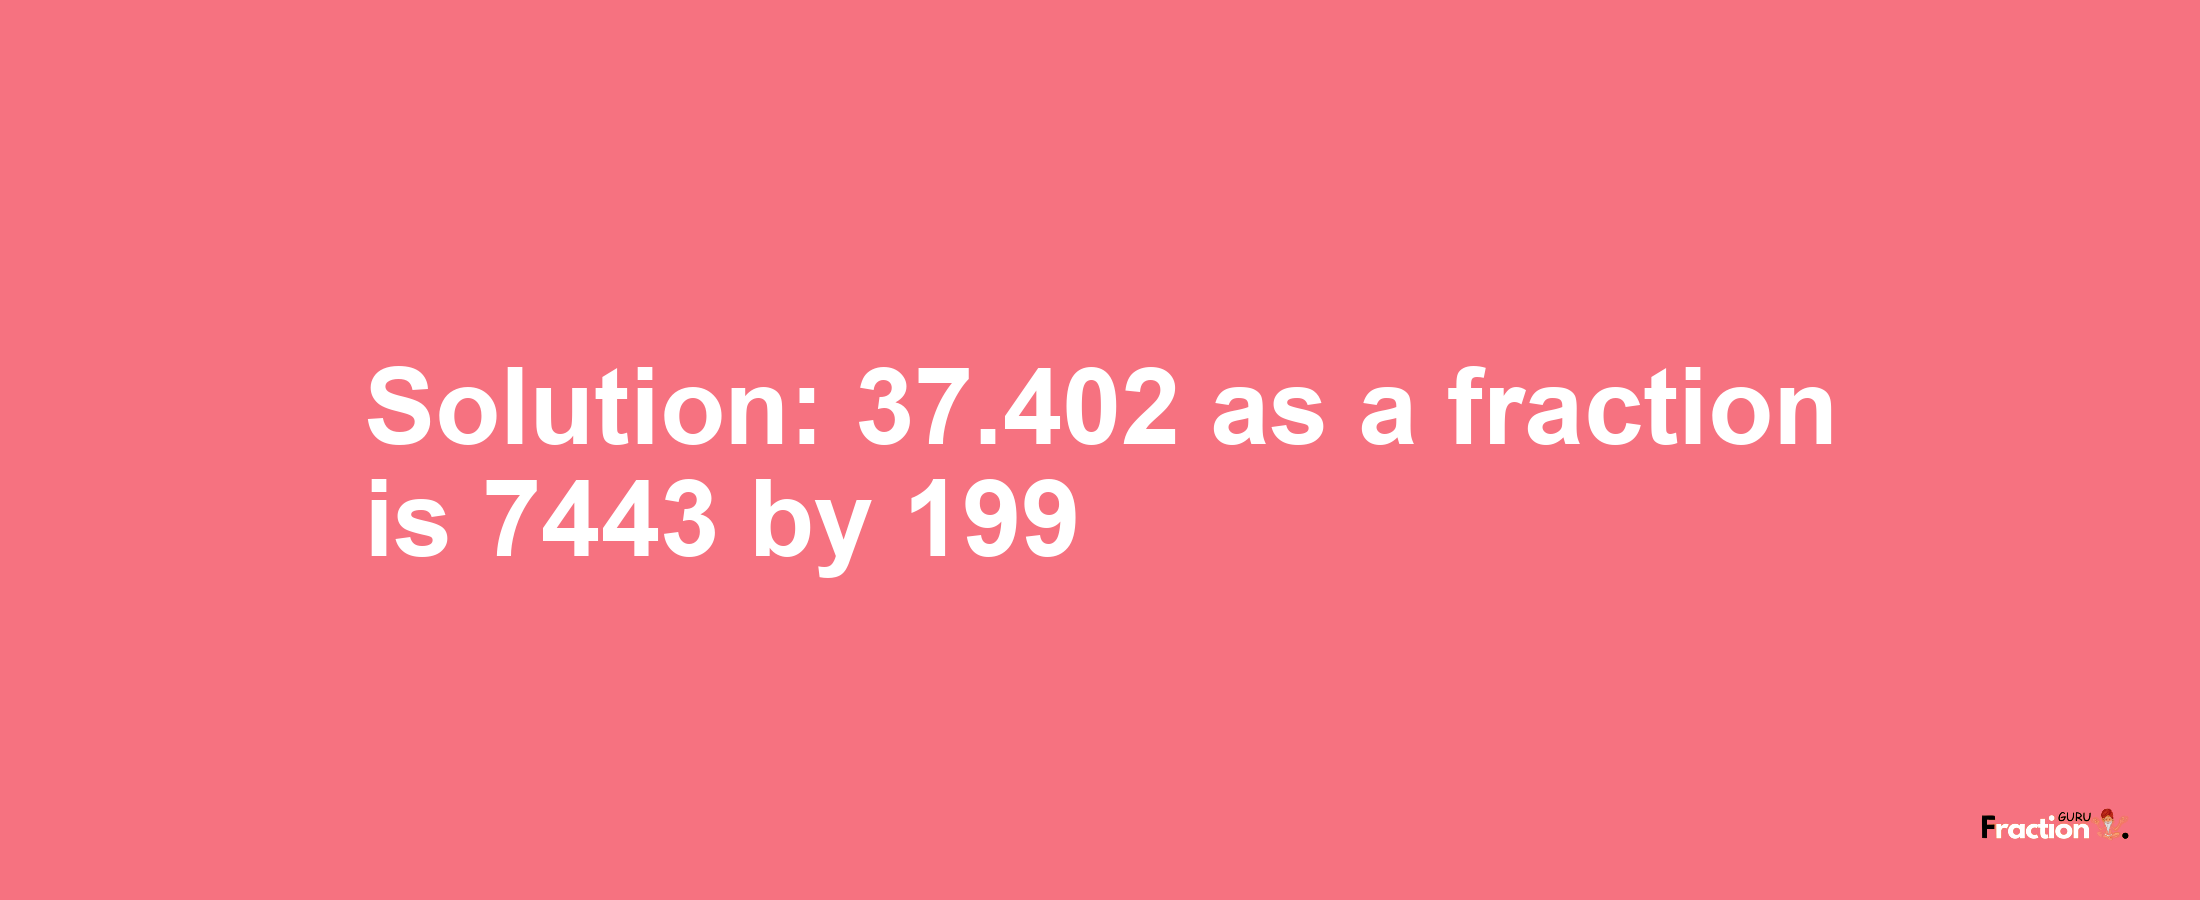 Solution:37.402 as a fraction is 7443/199